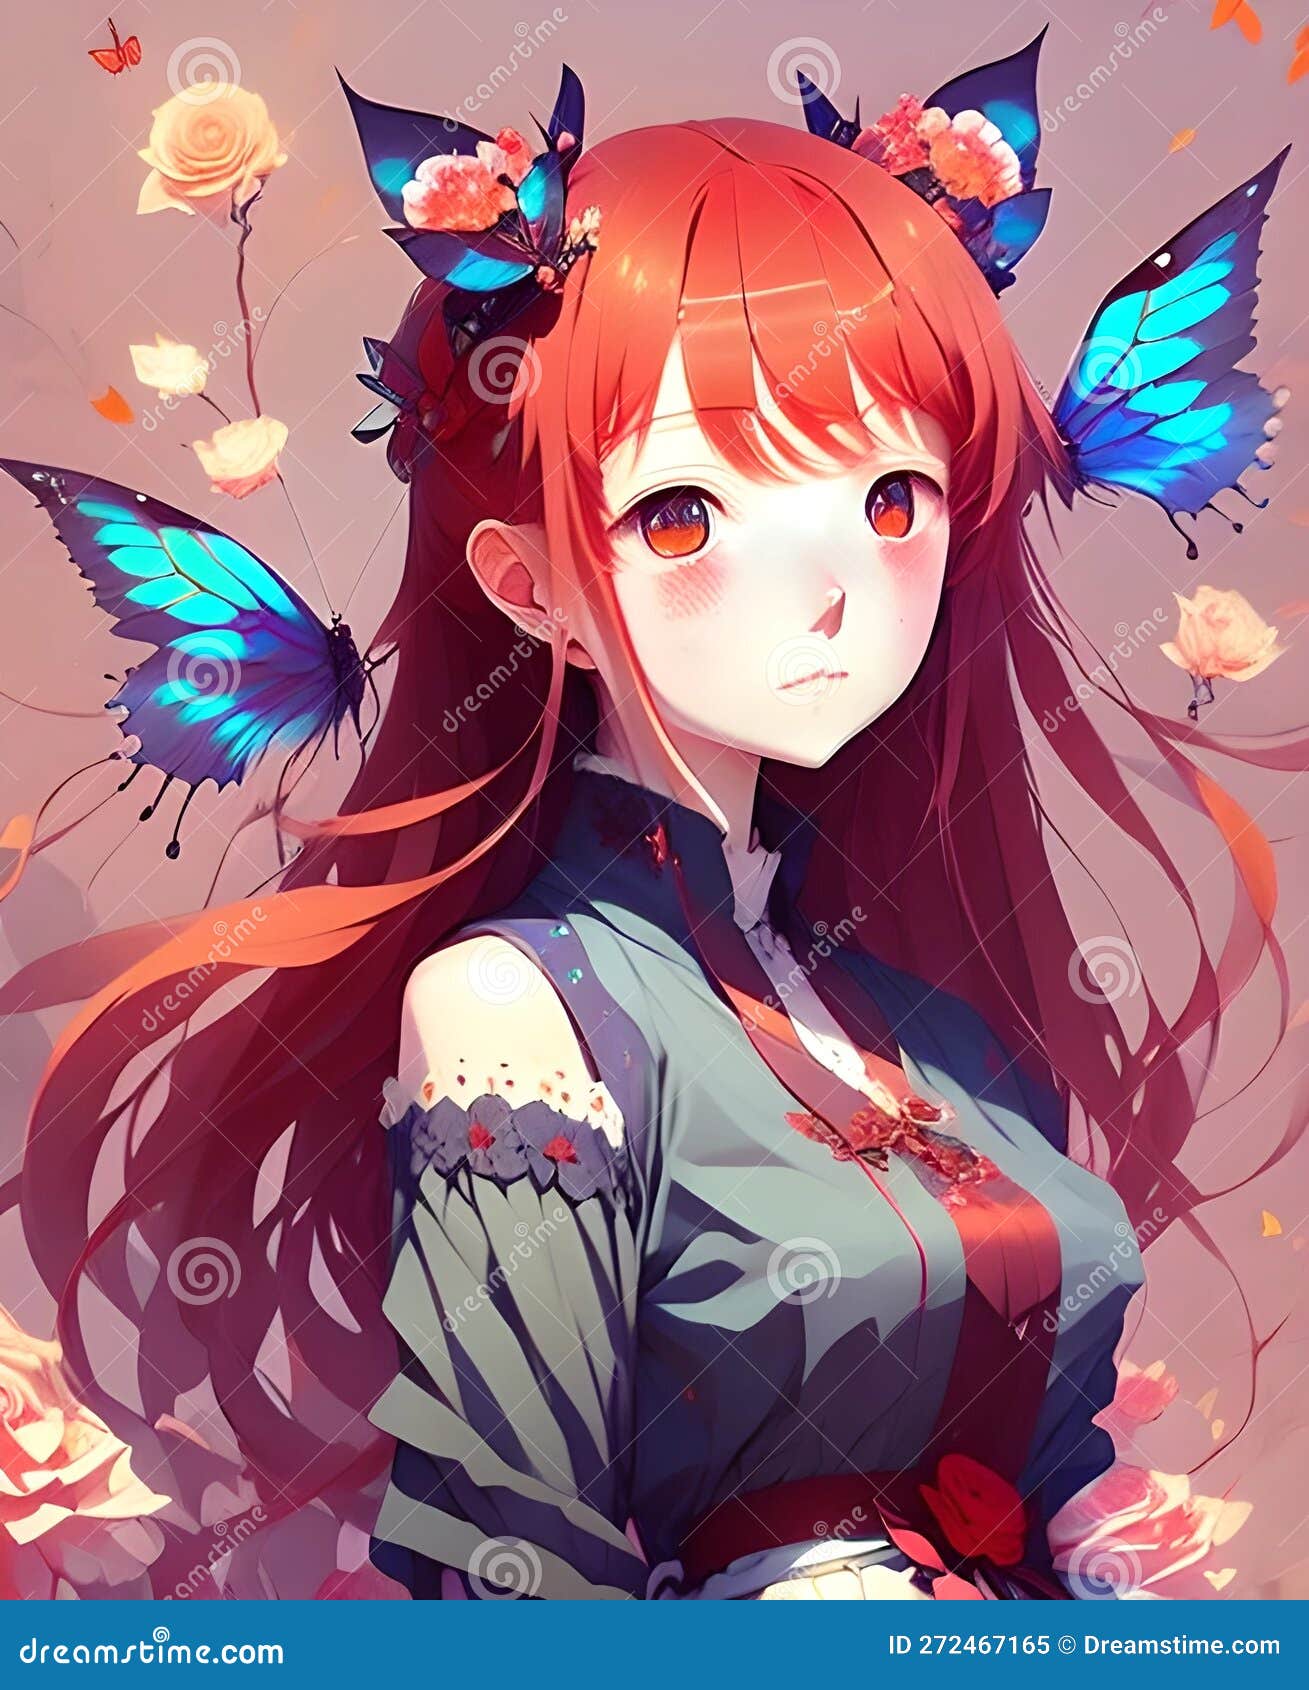 Top 50 Best Red Haired Anime Girls Of All Time | Wealth of Geeks